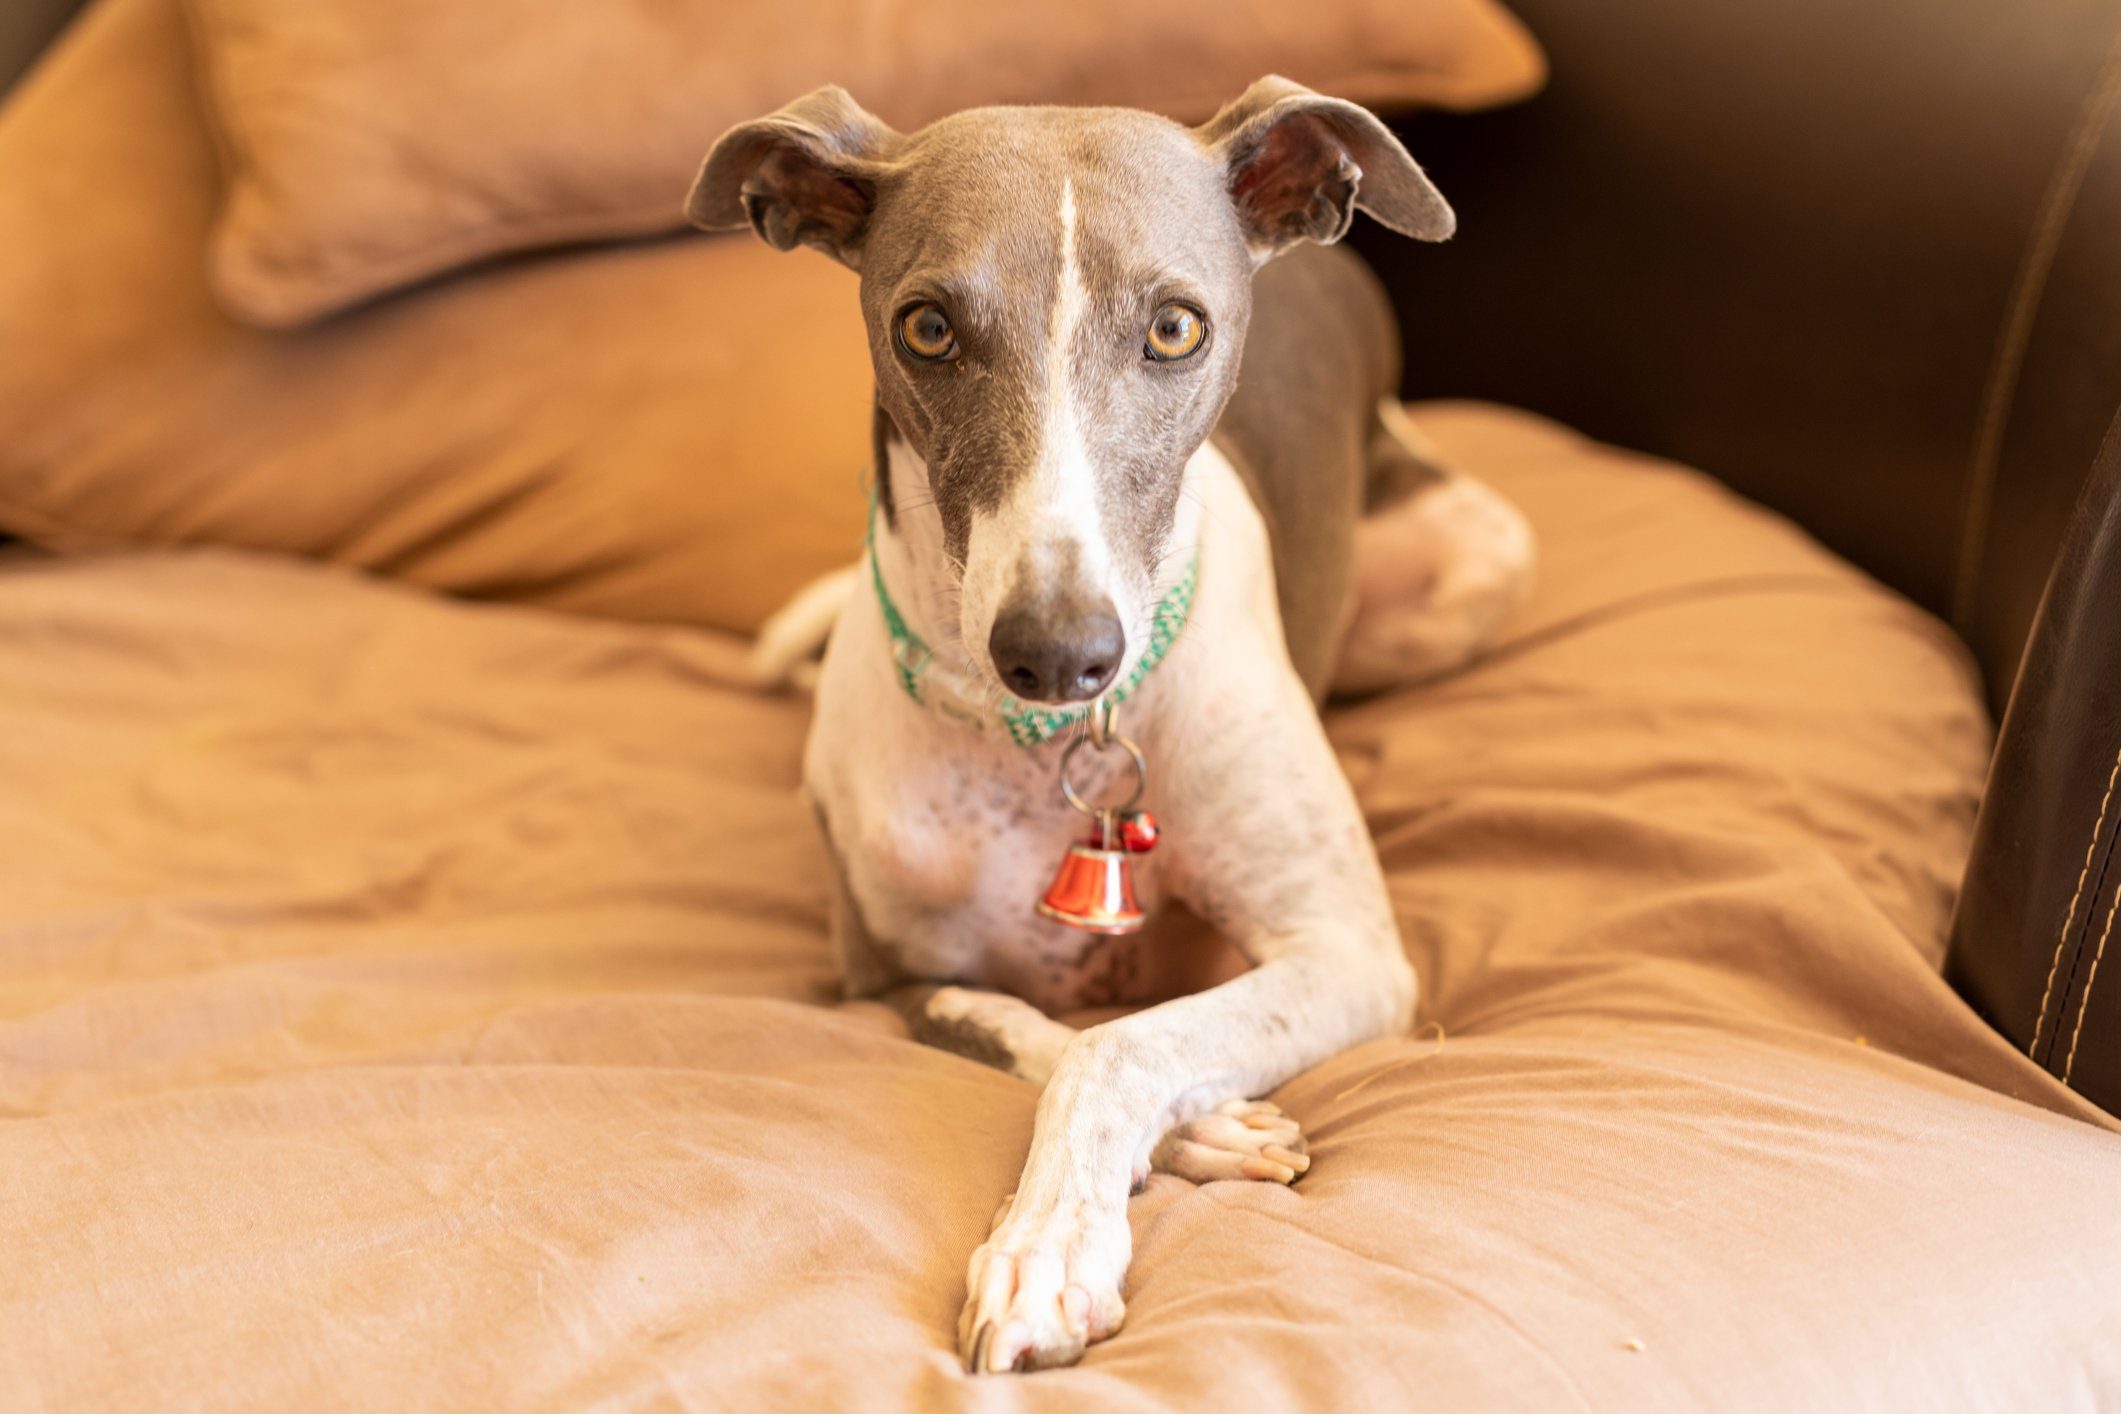 Lazy dog breeds - Italian greyhound sitting on a couch looking lovely at the camera